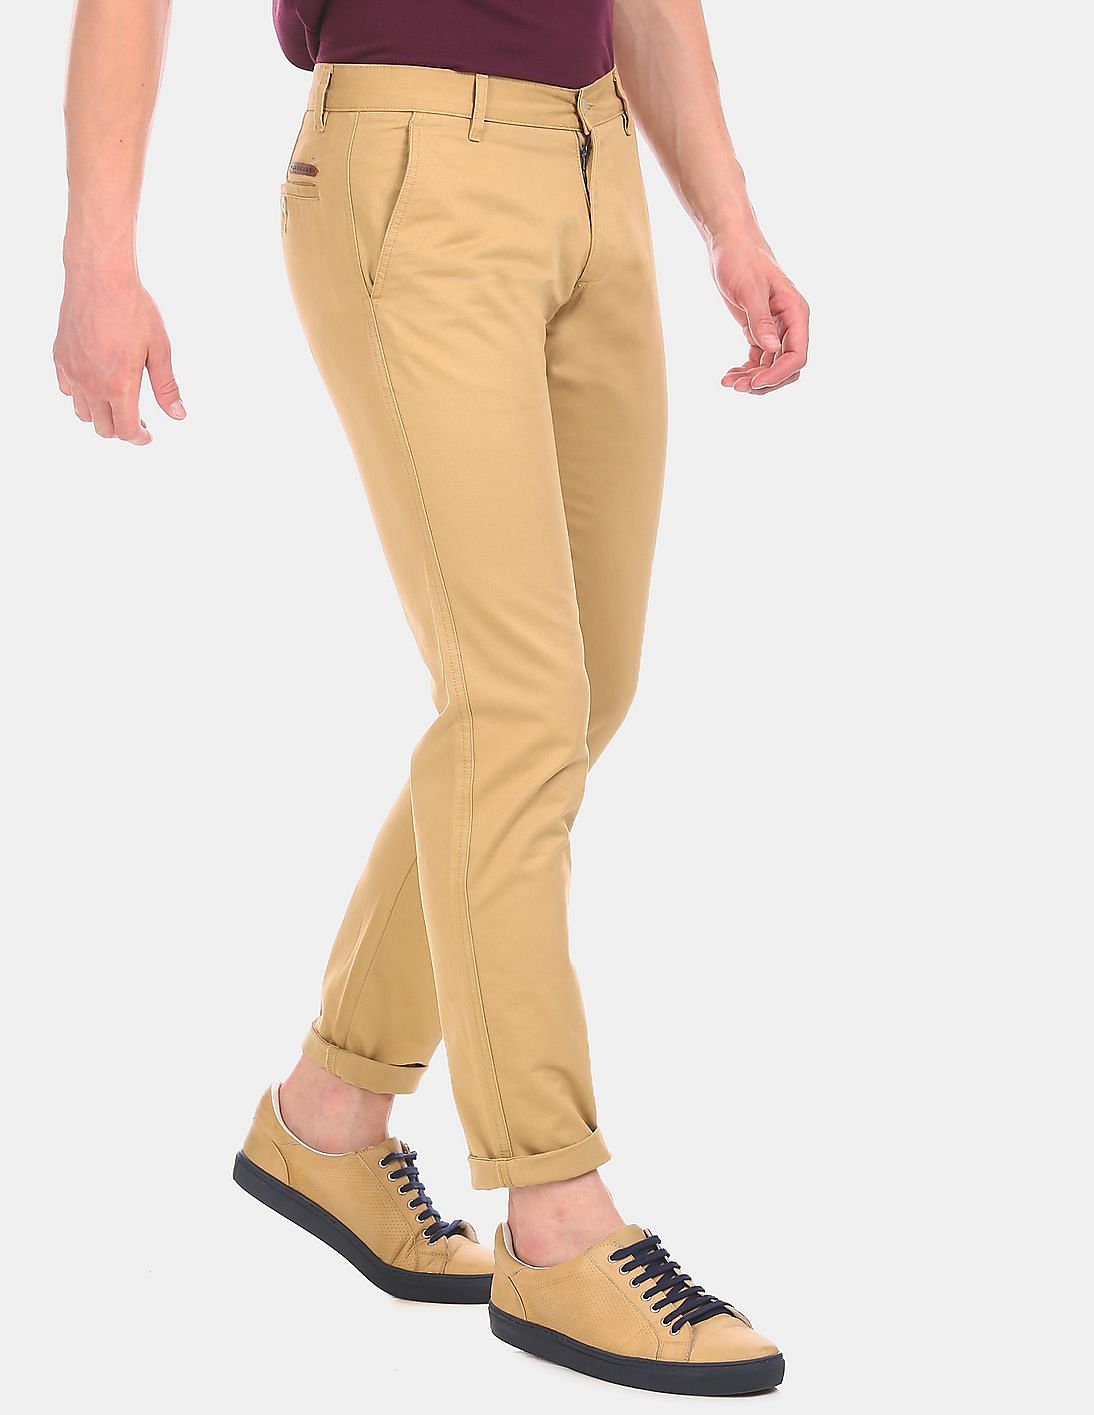 Ruggers Trousers  Buy Ruggers Trousers Online in India